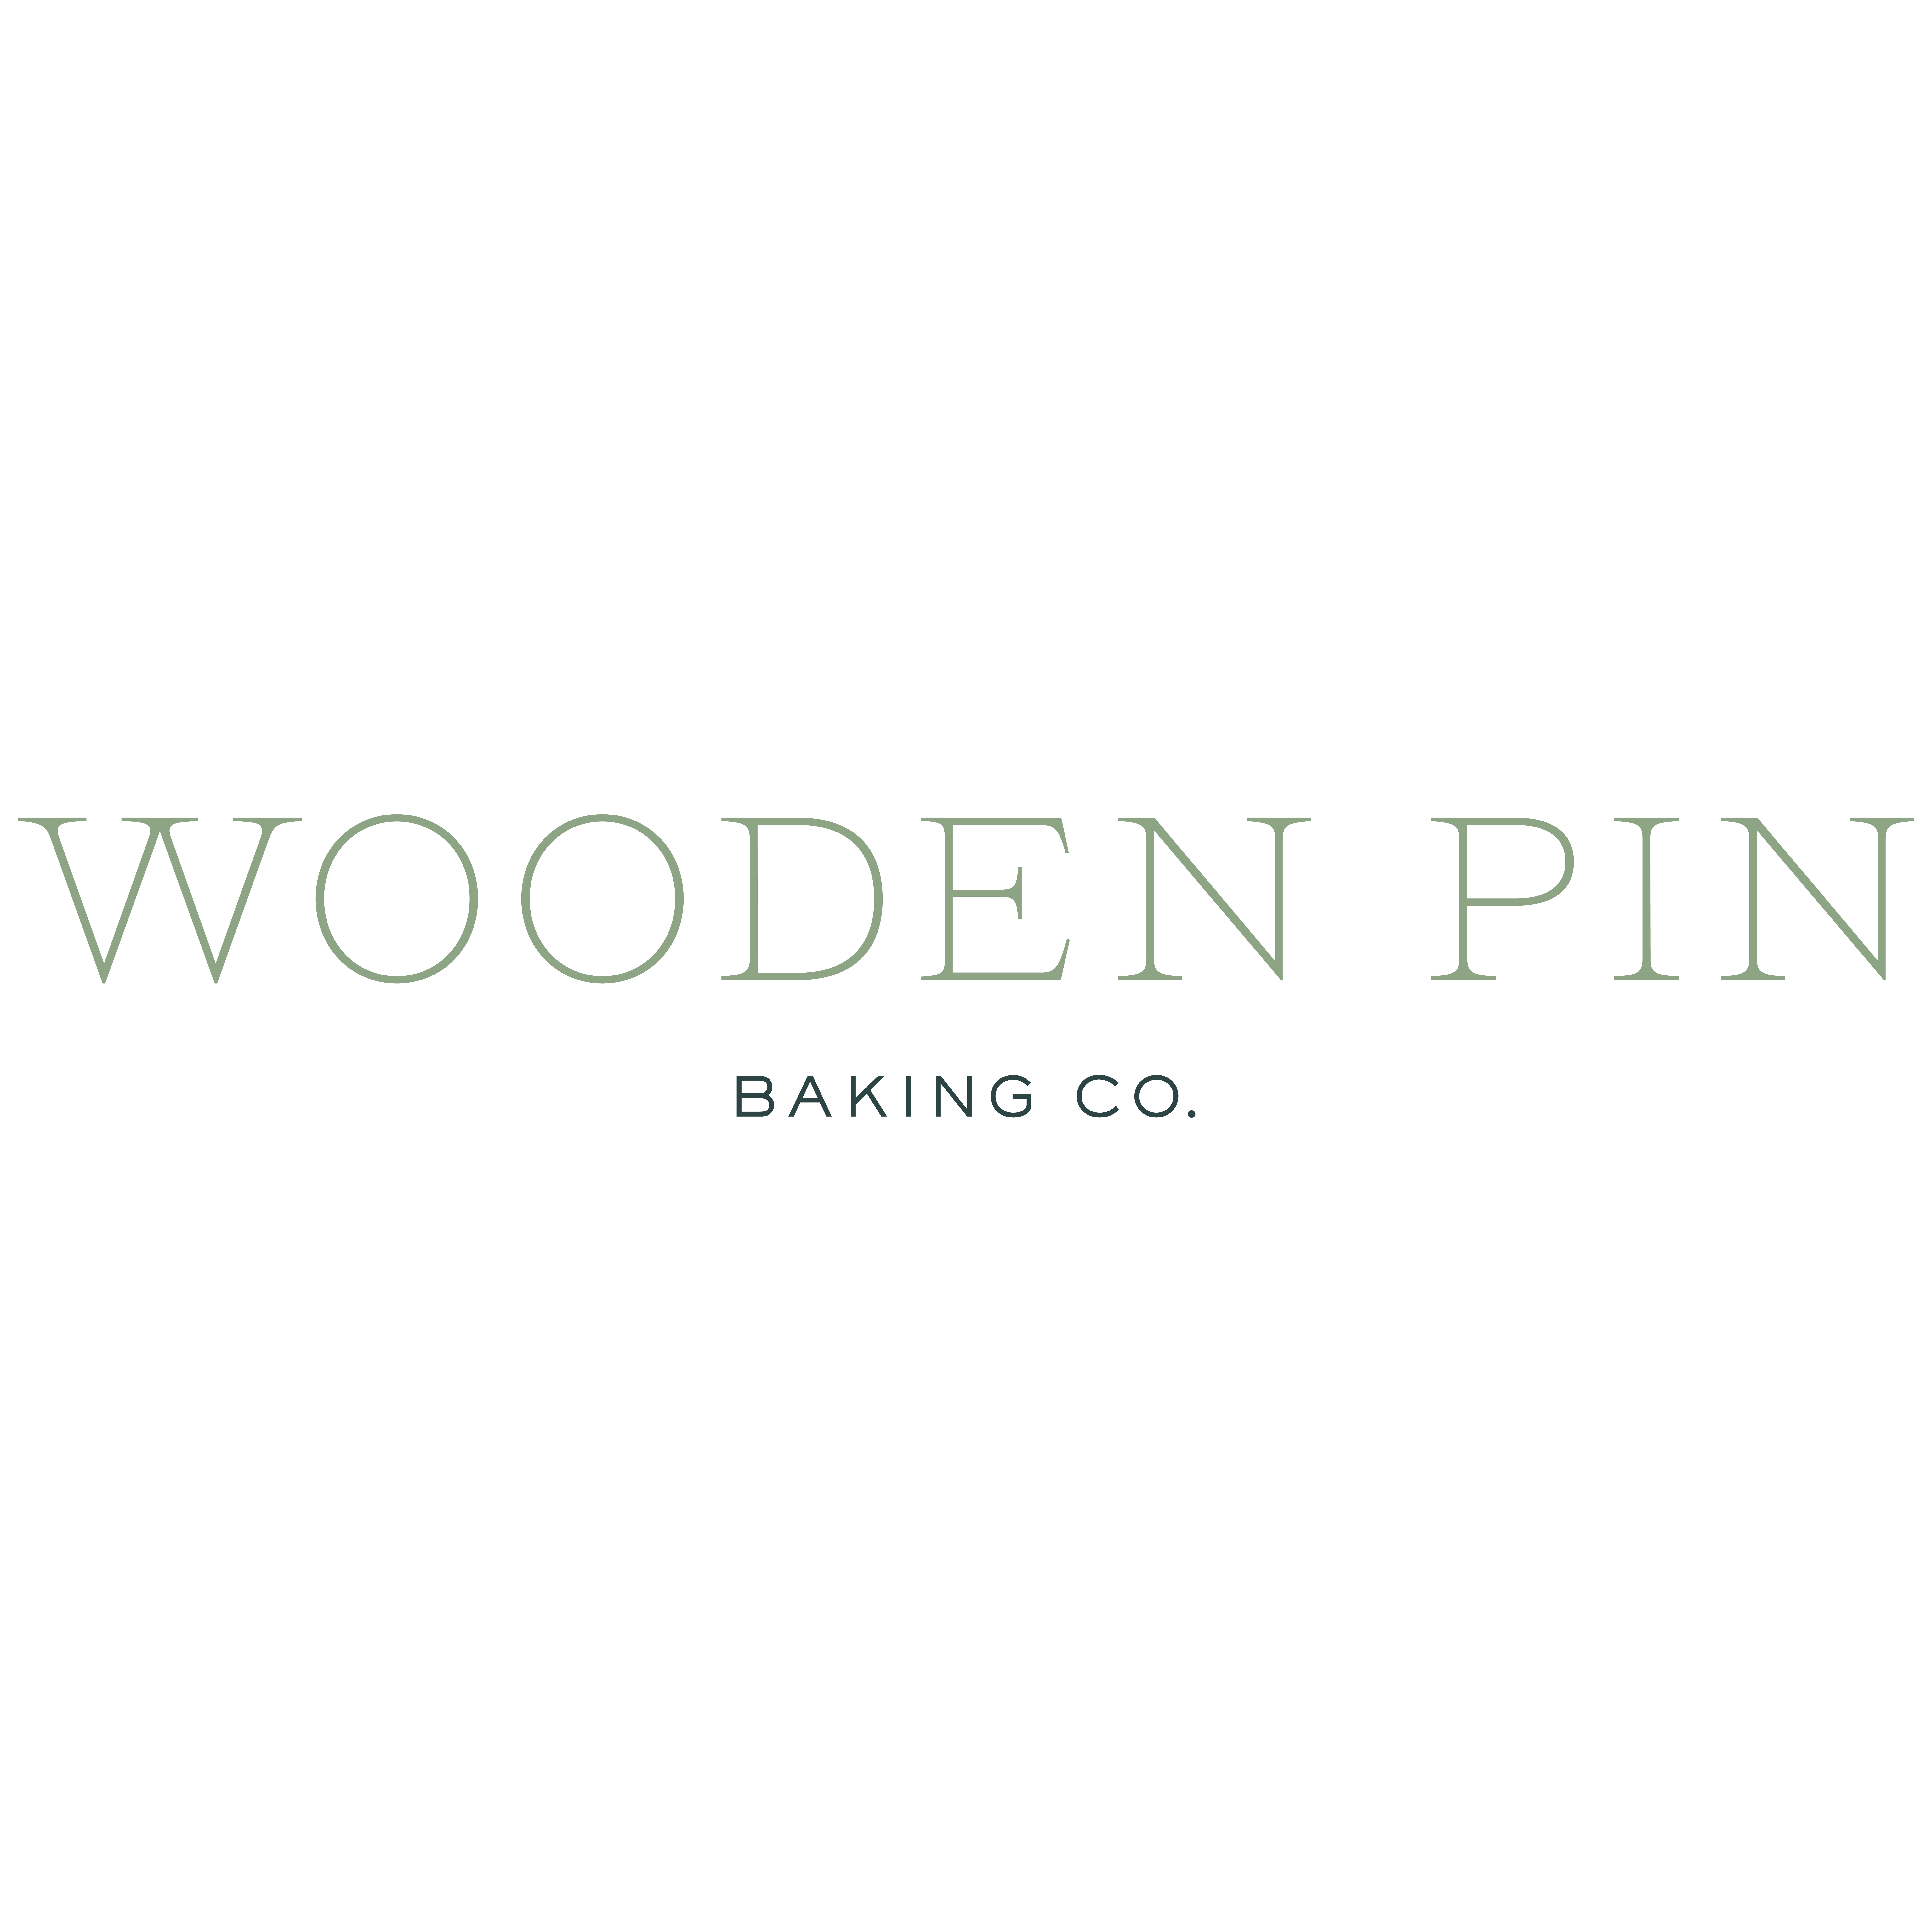 Wooden Pin Baking Co. - Middletown, RI - (401)314-3122 | ShowMeLocal.com